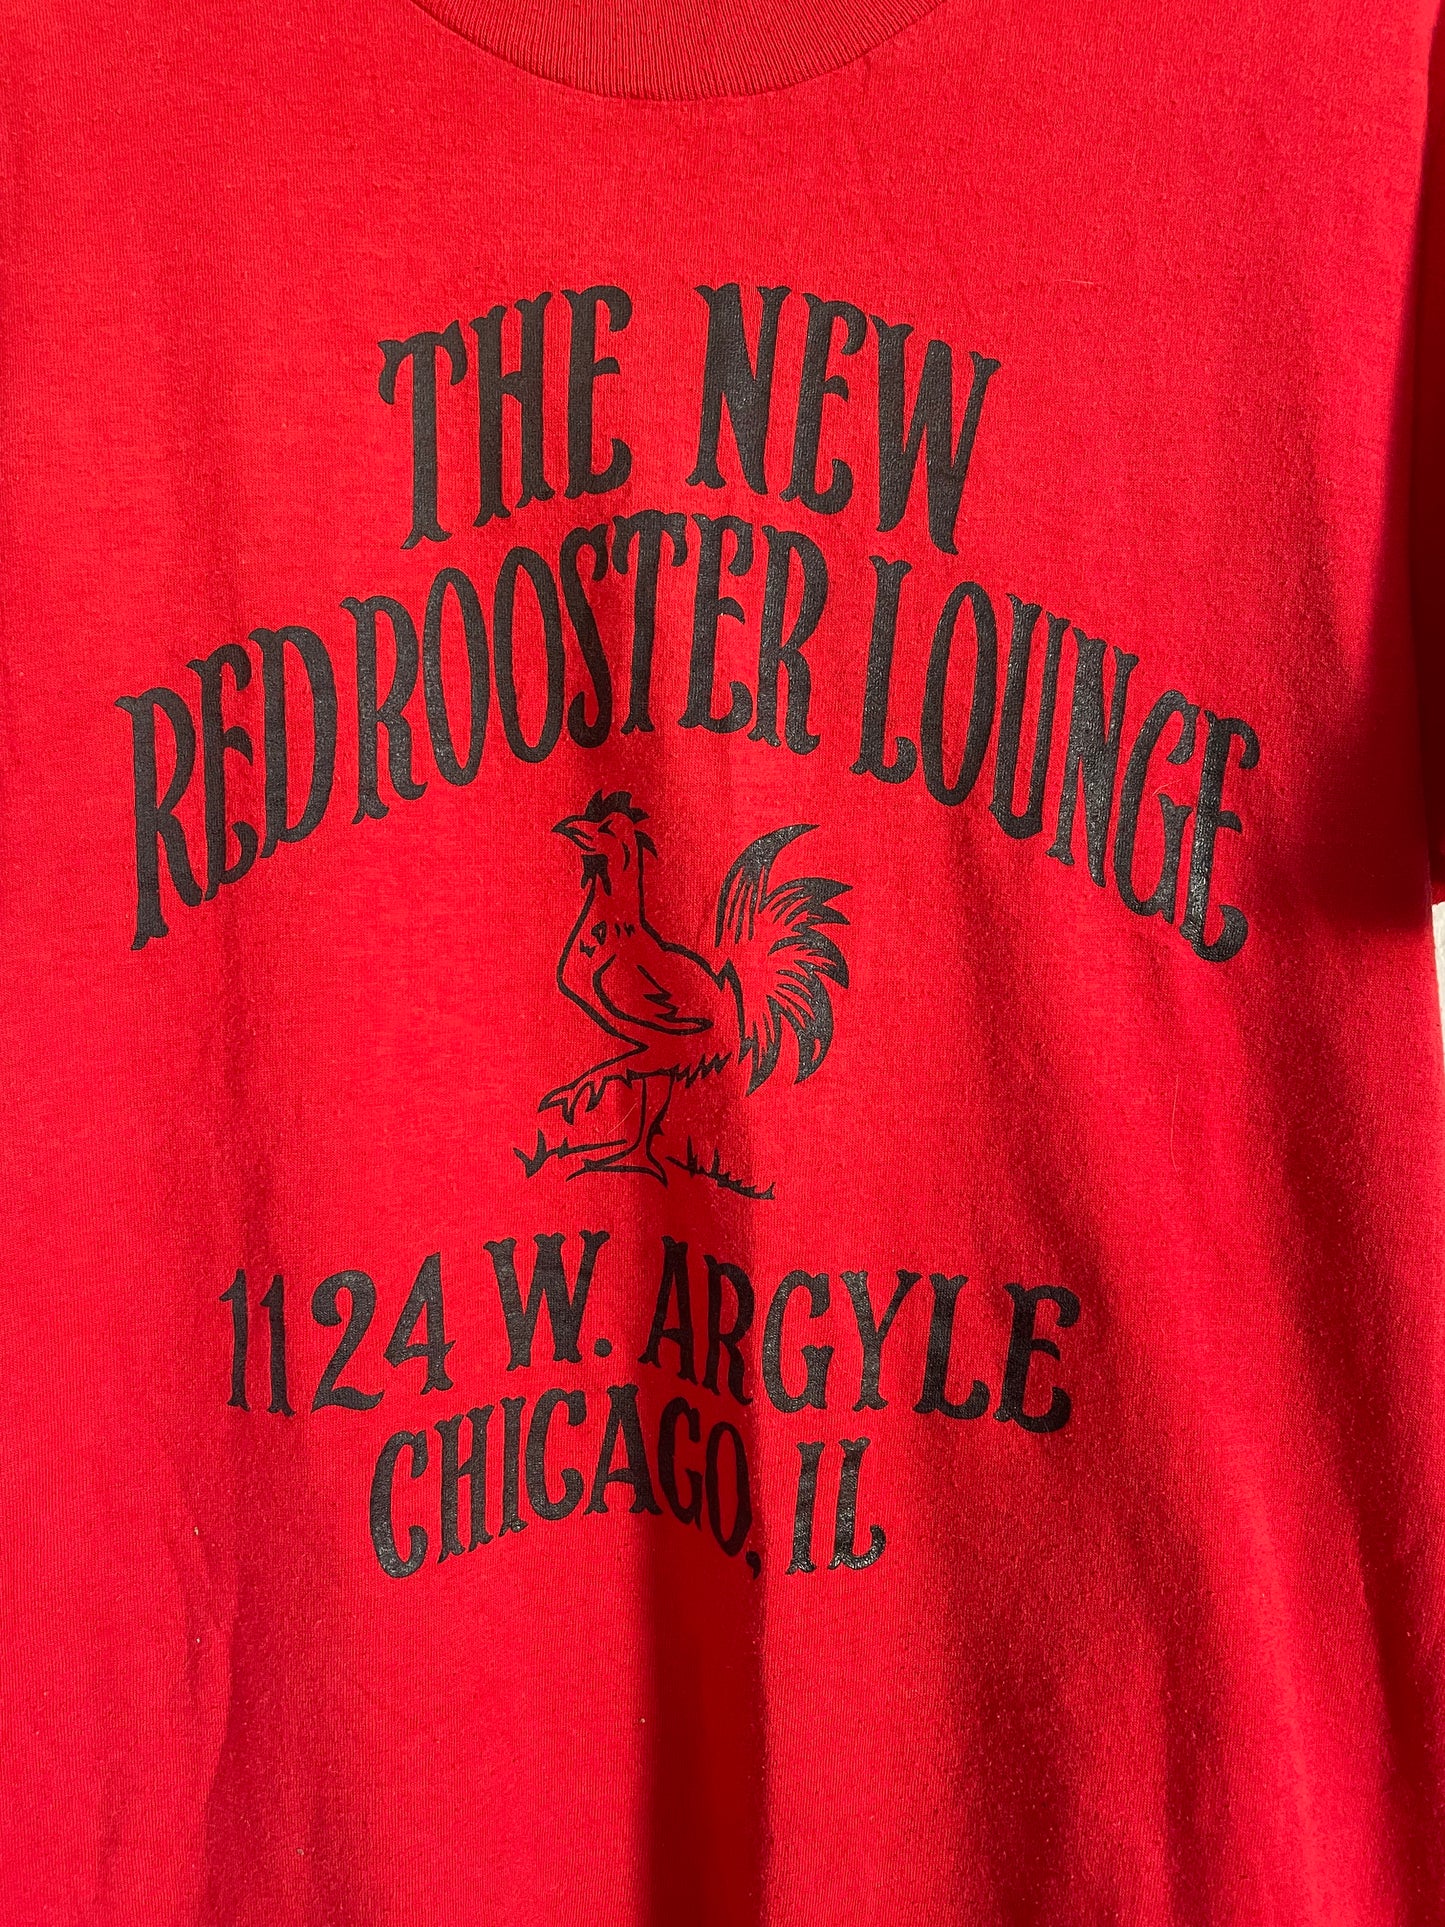 80s Red Rooster Lodge, Chicago, Illinois Tee